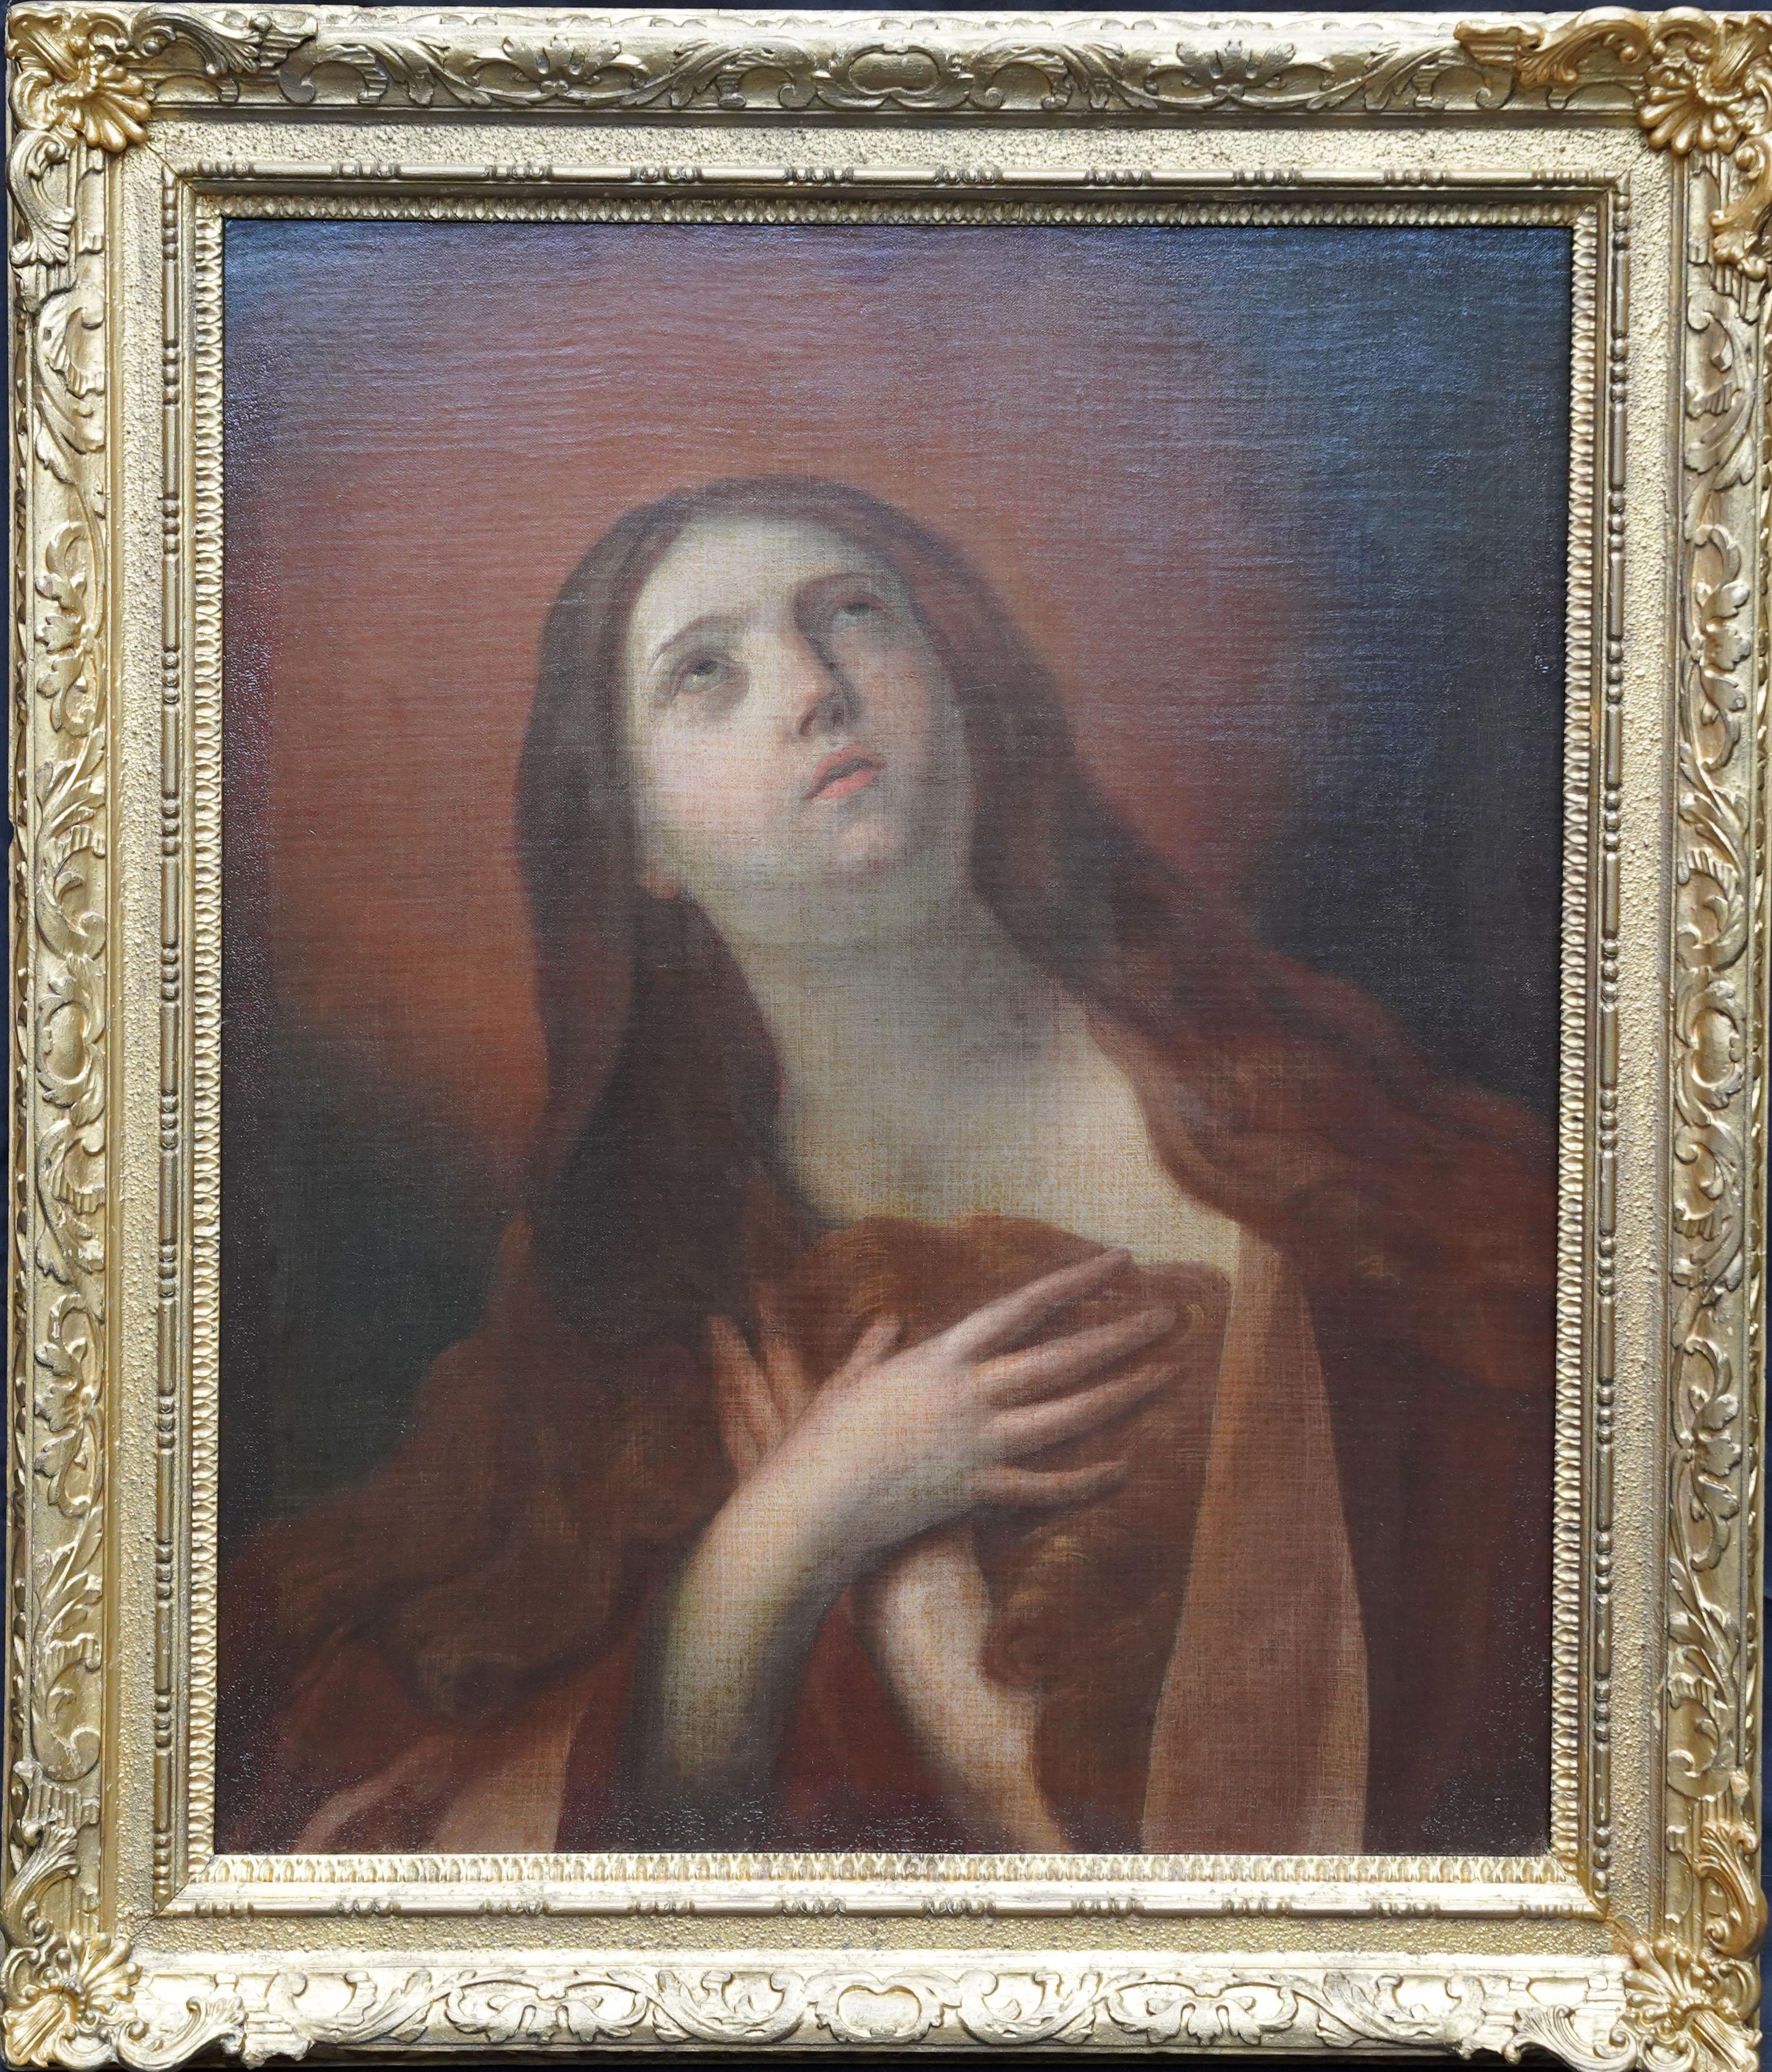 Guido Reni Portrait Painting - The Penitent Mary Magdalene - Old Master religious art portrait oil painting